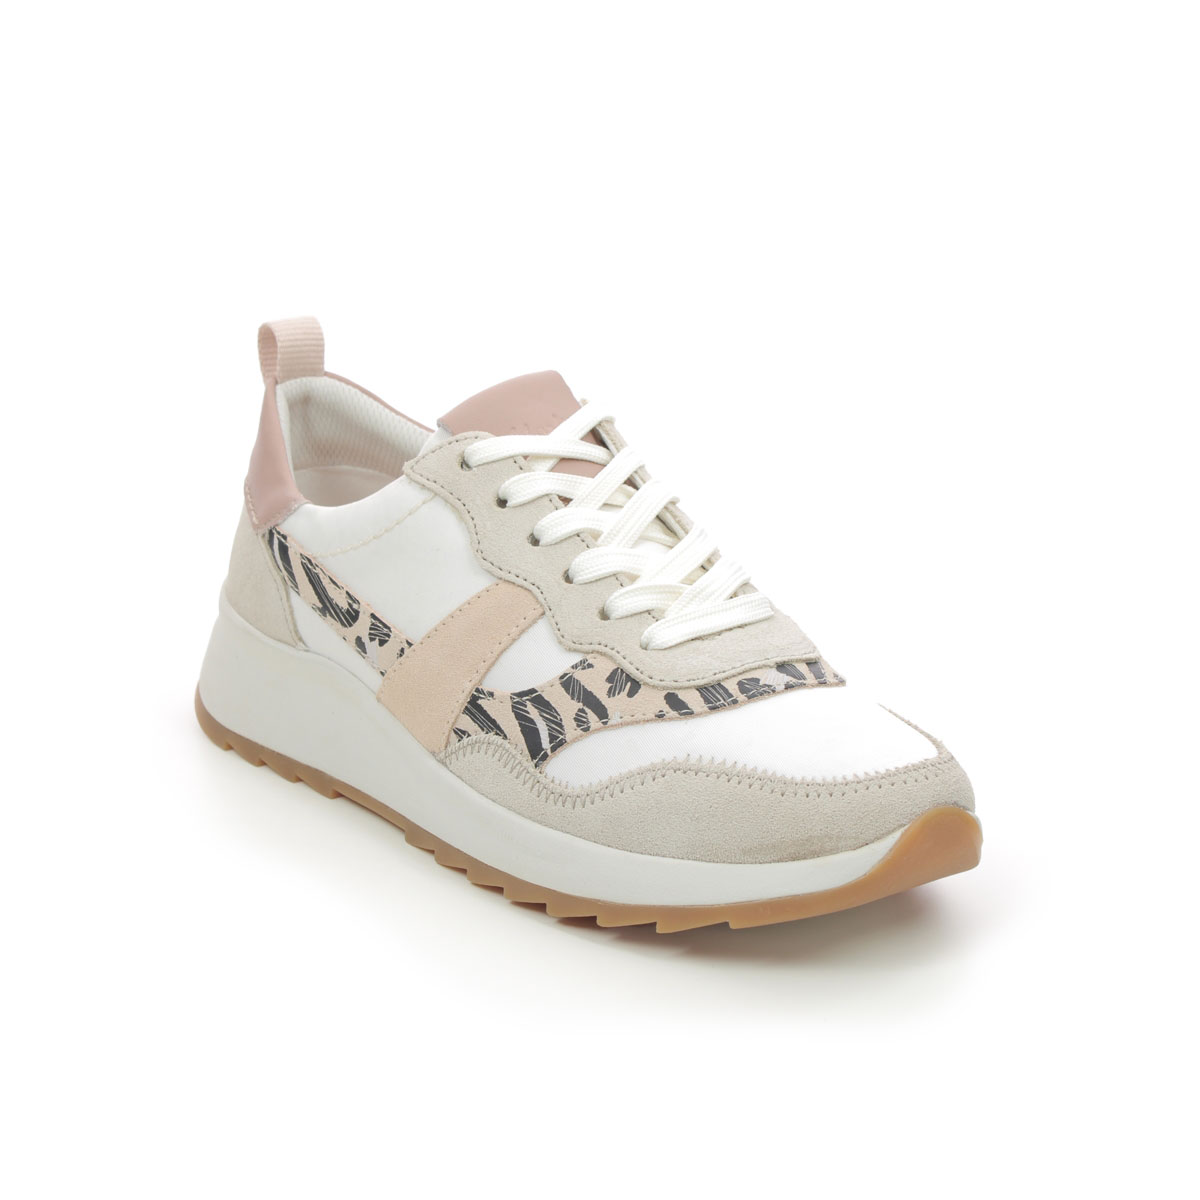 Clarks Dashlite Jazz White Pink Womens Trainers 704294D In Size 7 In Plain White Pink